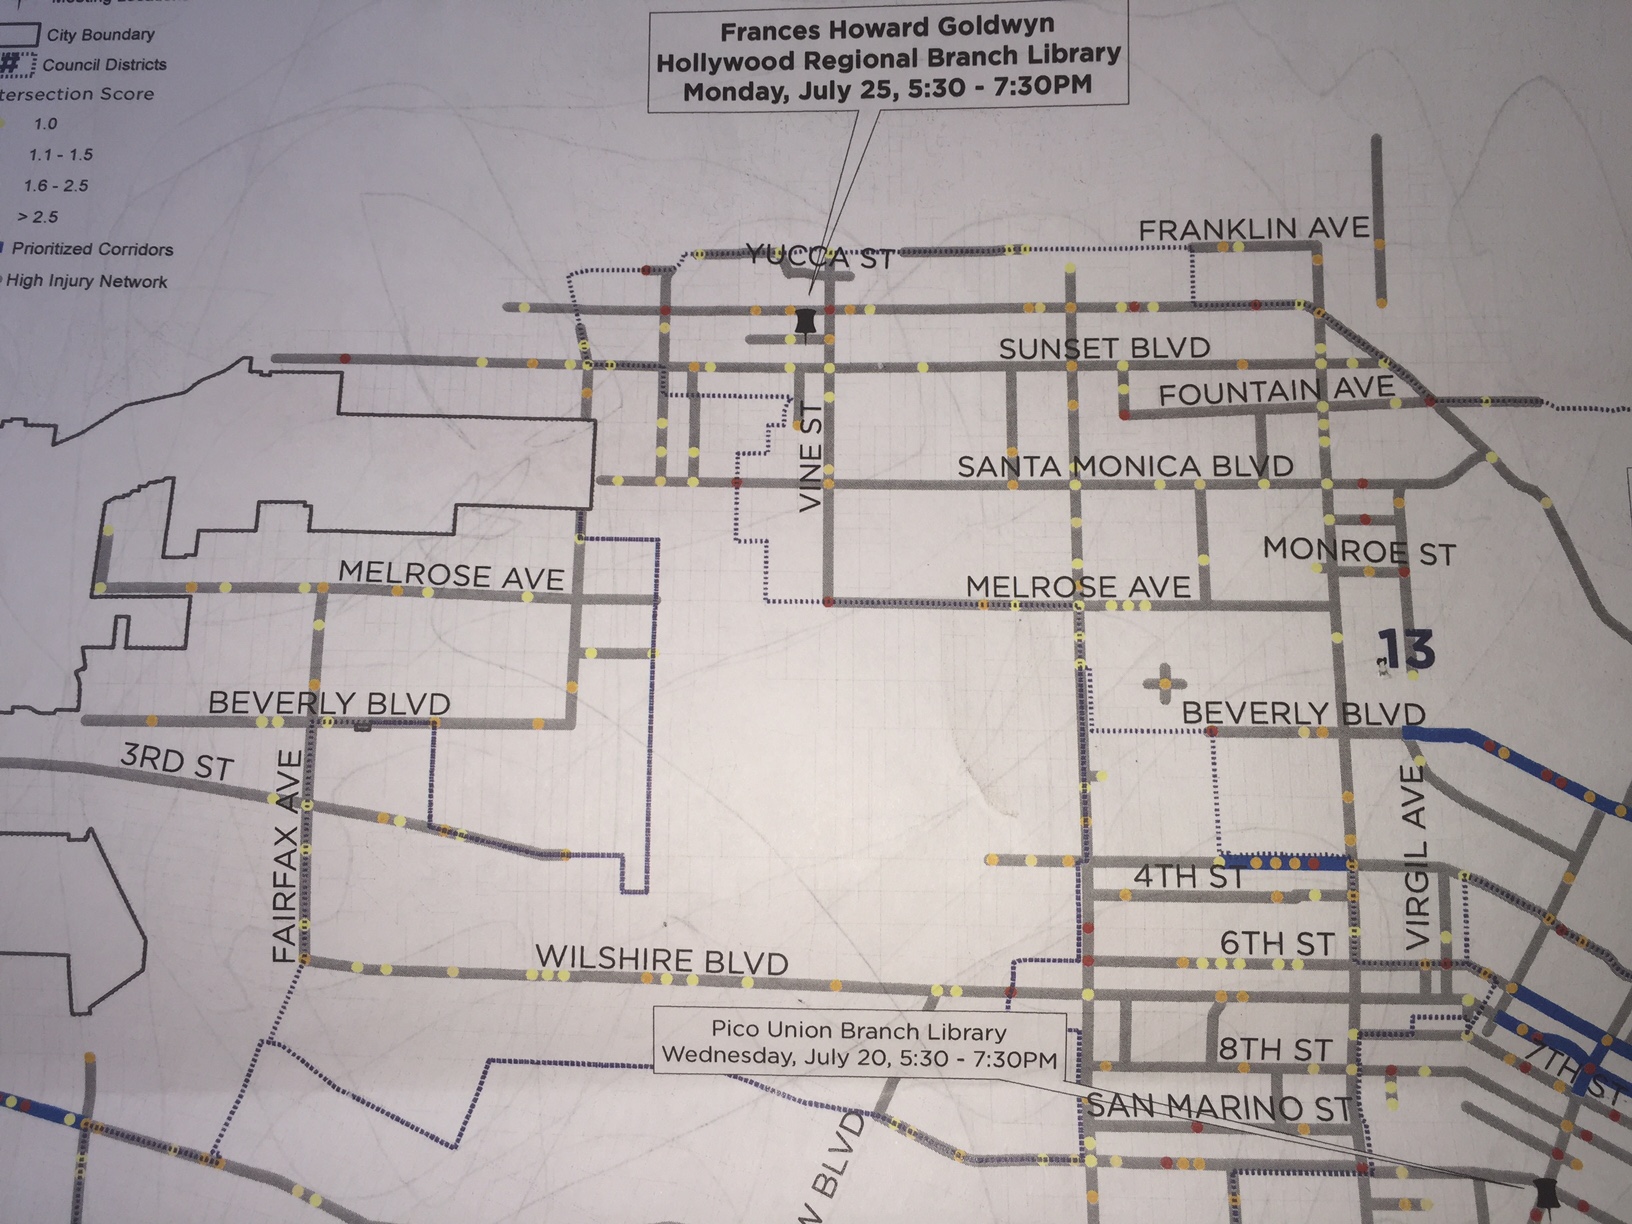 Vision Zero High Injury Network prioritized intersections/corridors detail map centered on Hollywood